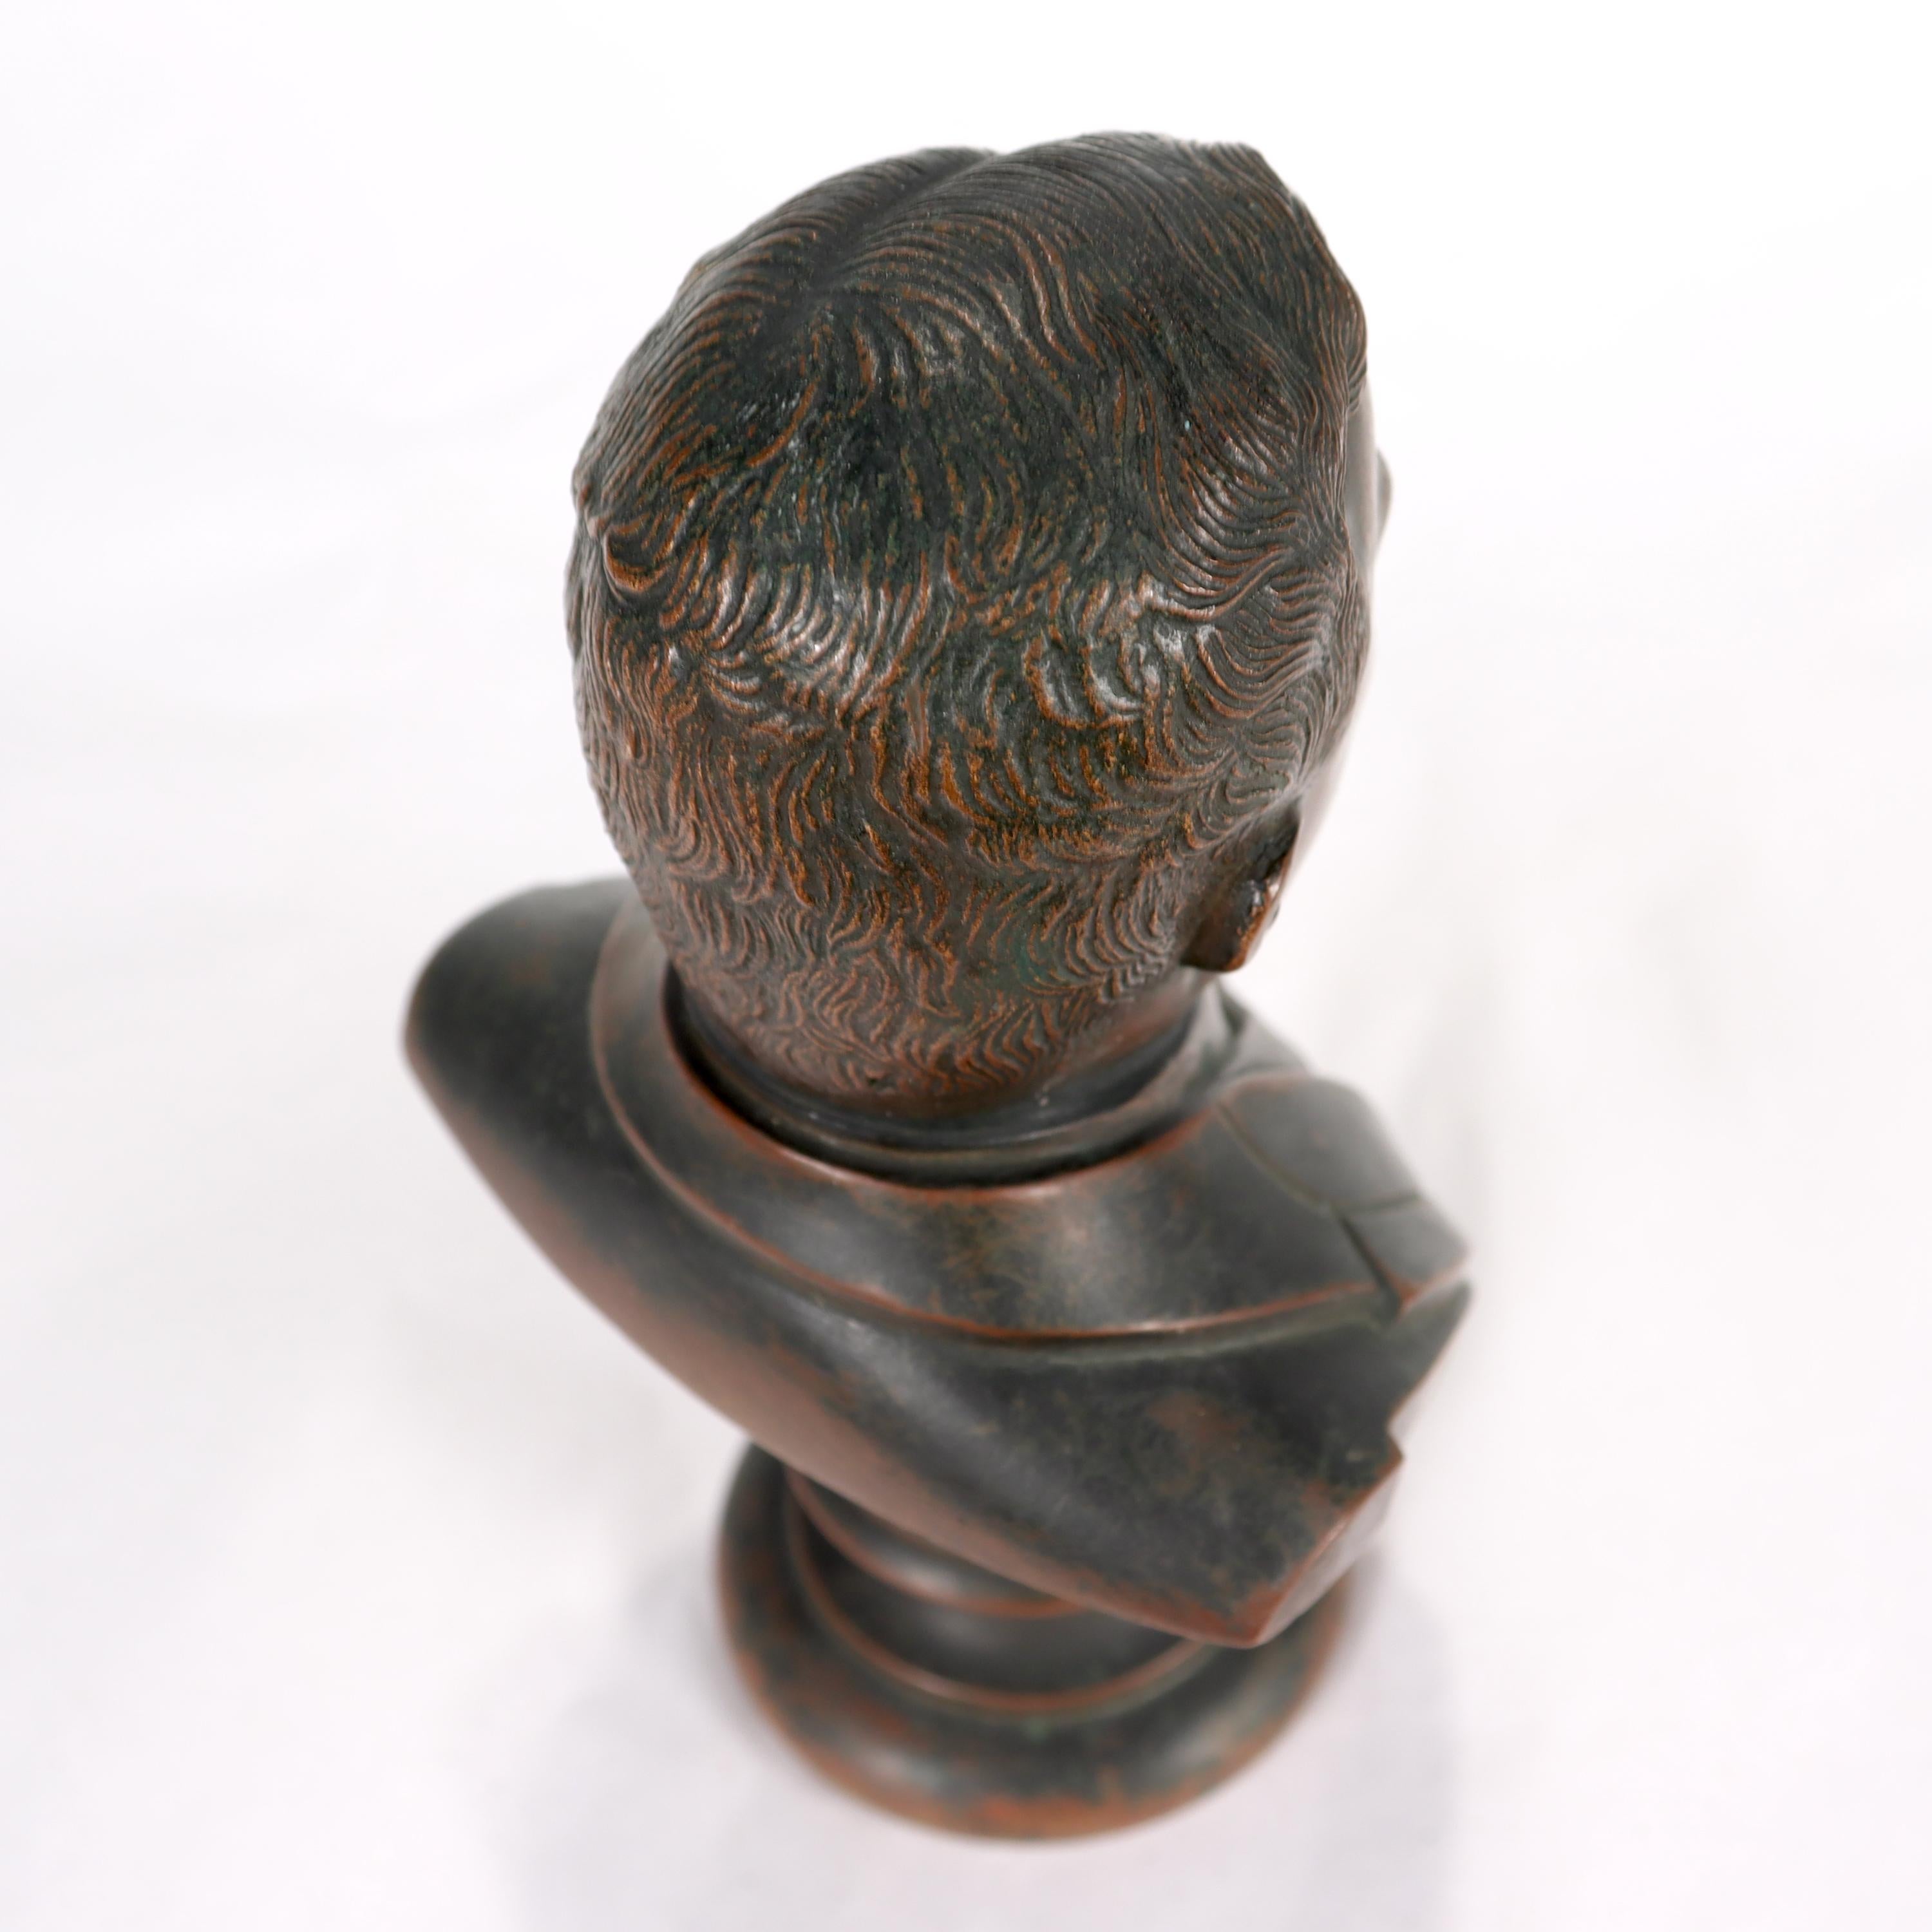 Small Desk or Cabinet Sized Bronze Bust of President Theodore 'Teddy' Roosevelt 6